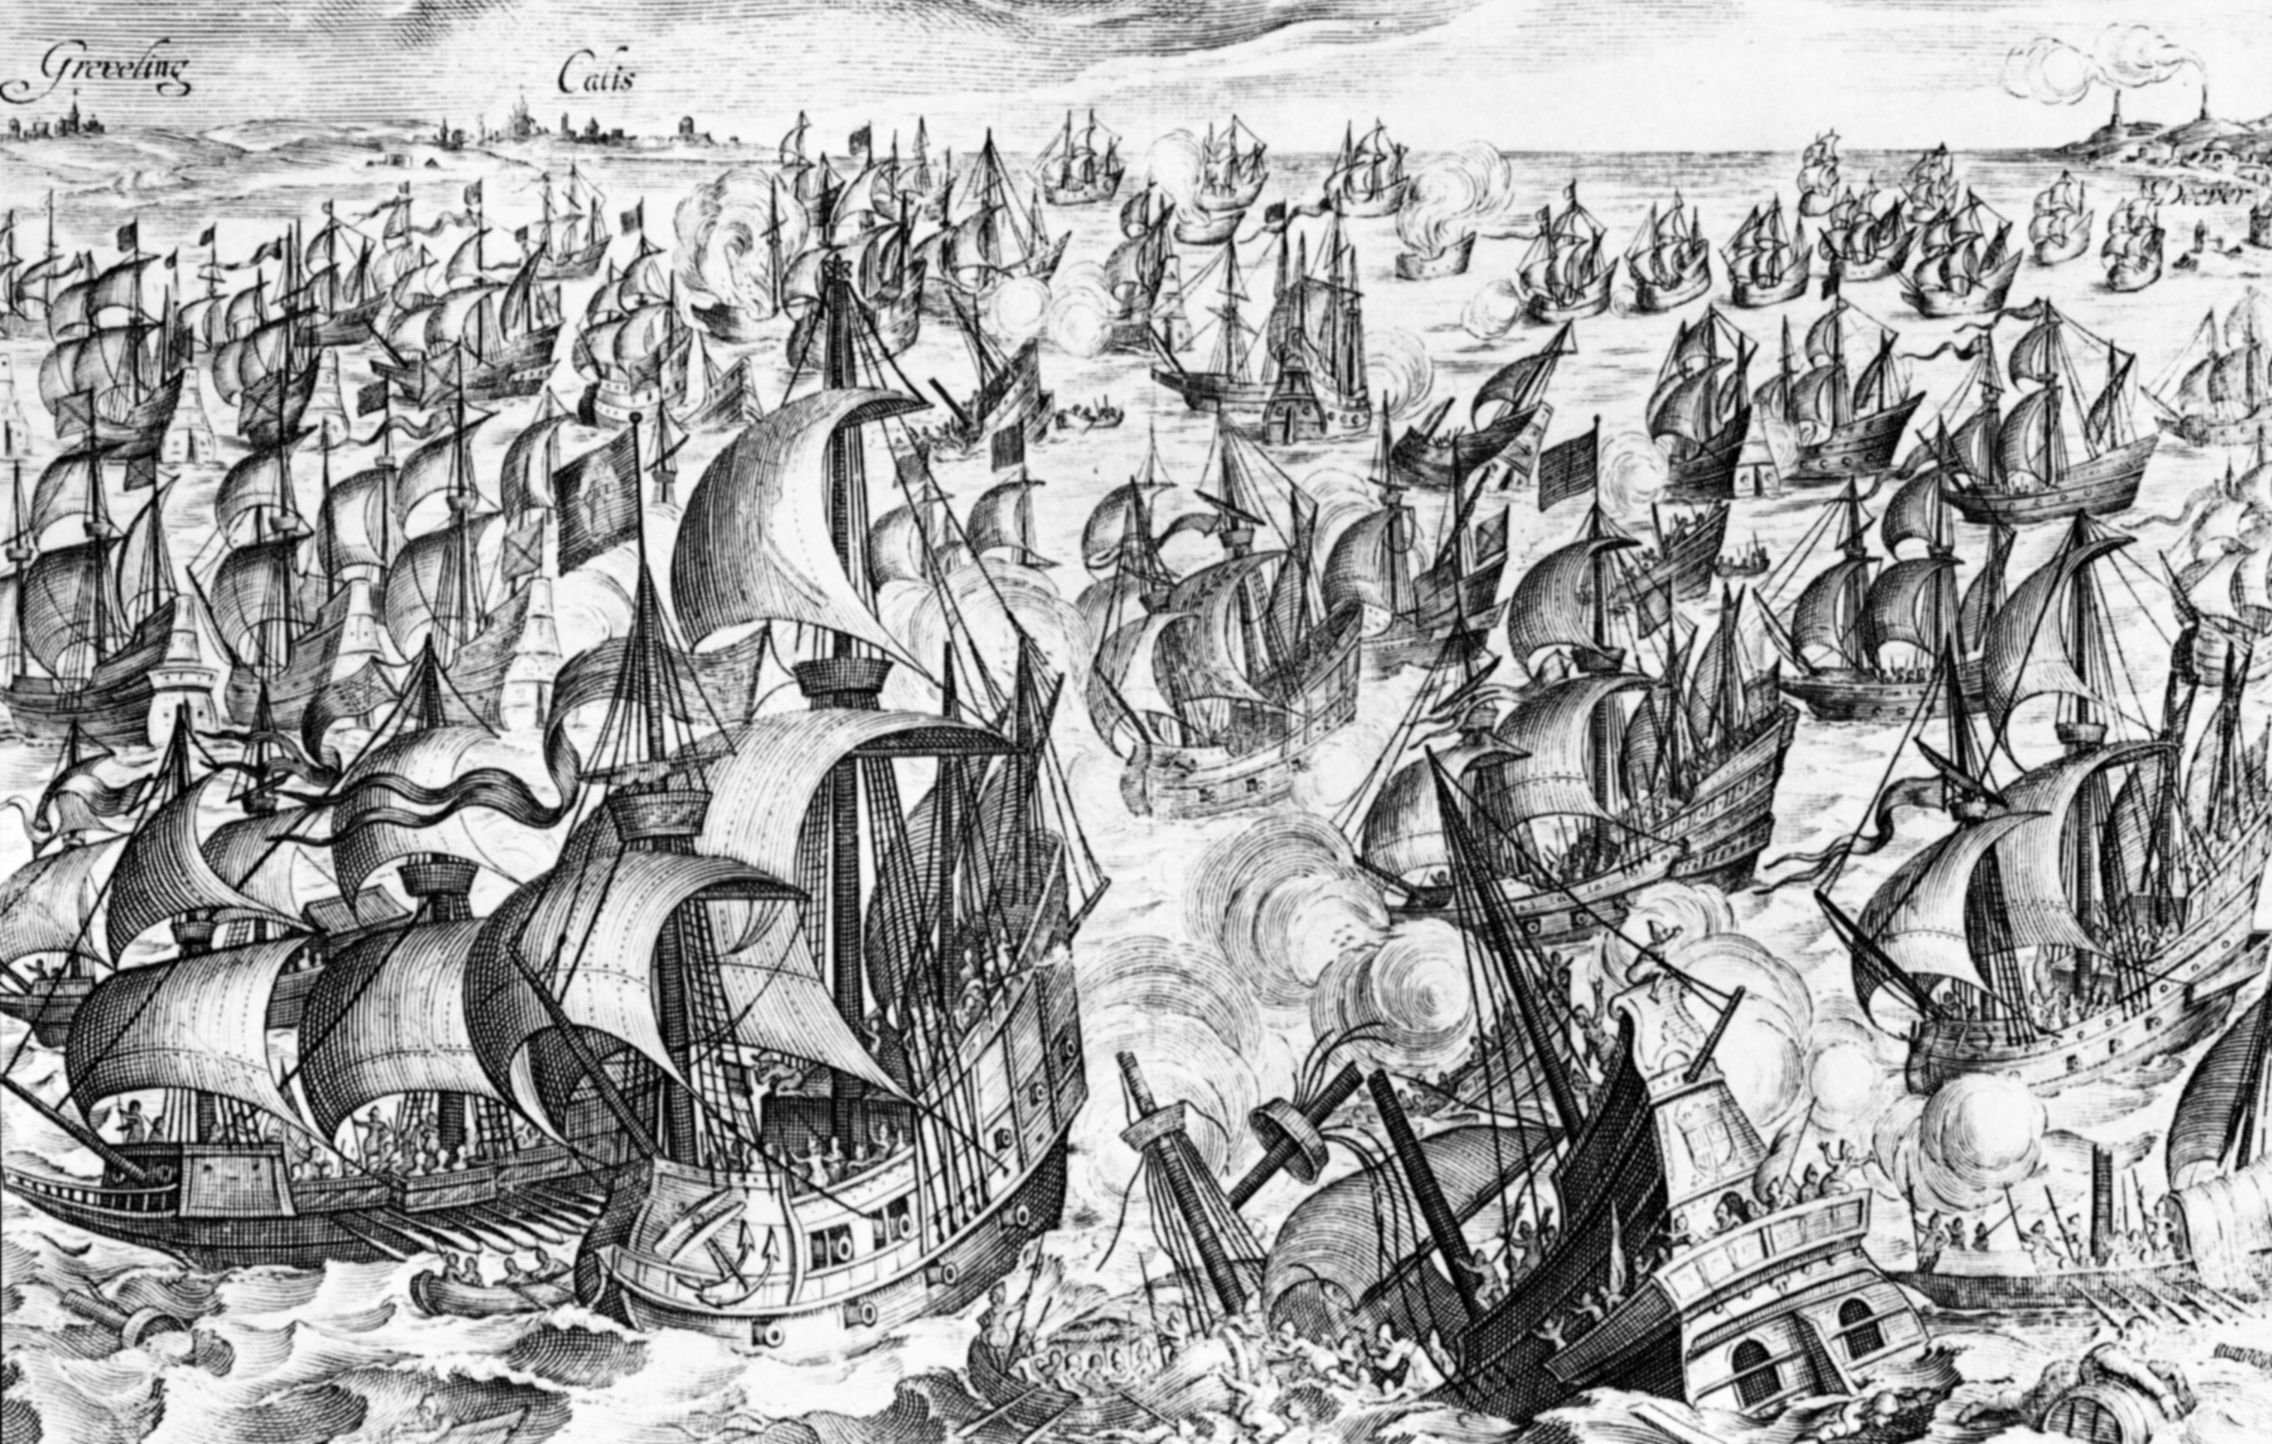 Spanish seamen abandon a sinking galleon off Gravelines at the height of the battle, while other vessels in the Armada flounder and burn under the relentless English onslaught.